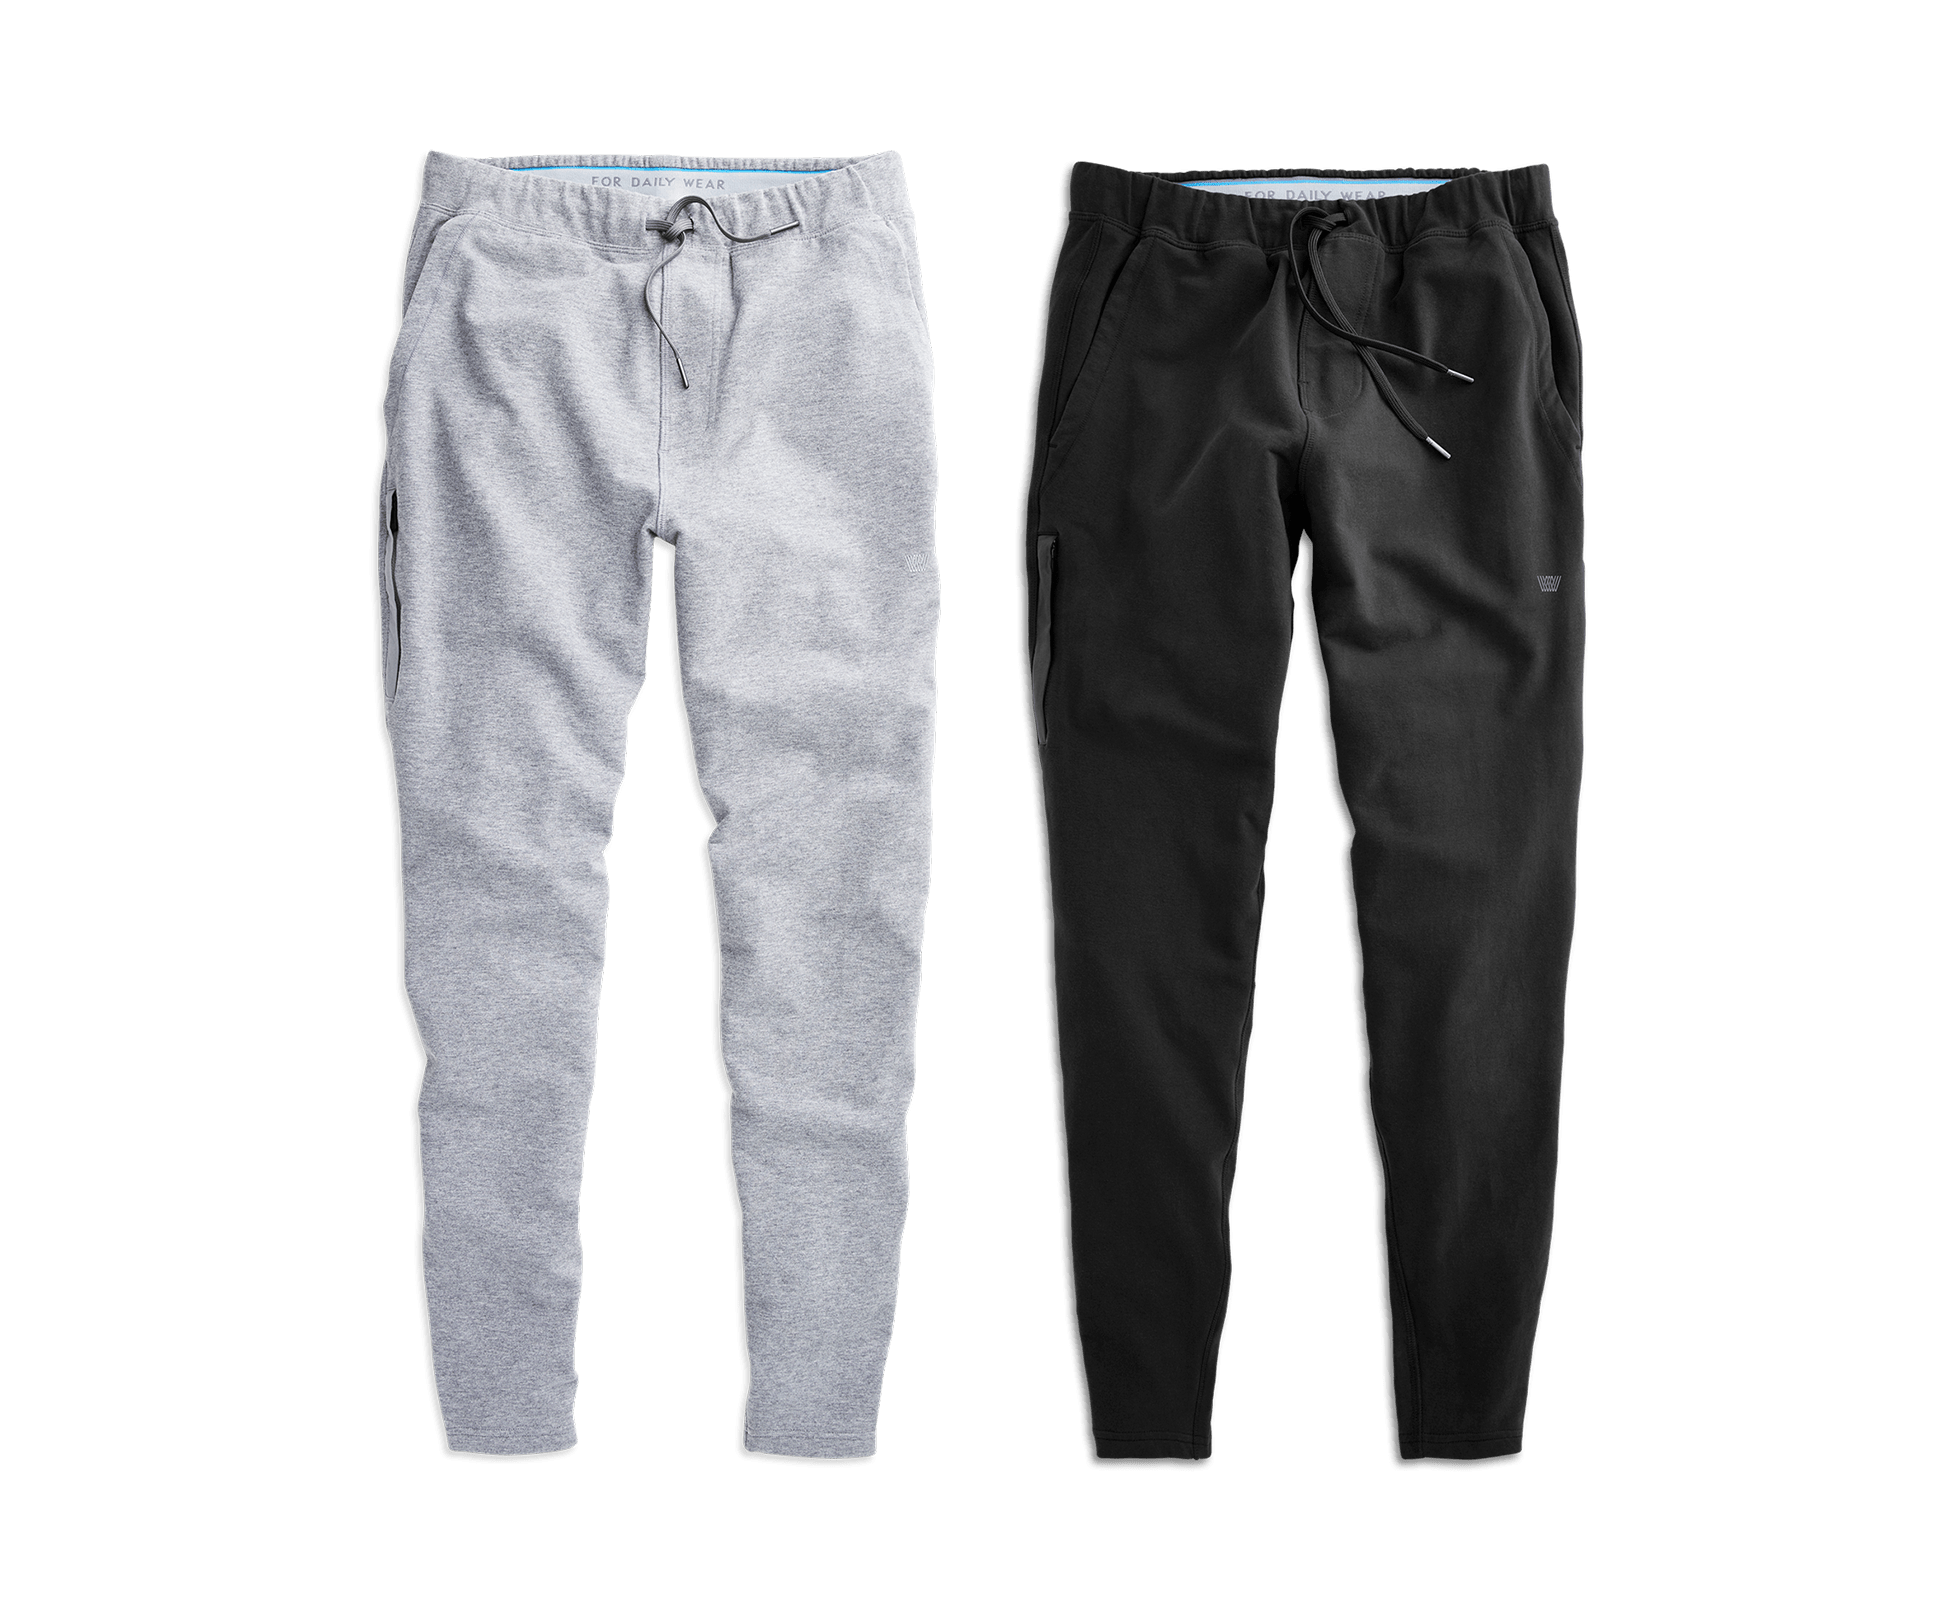 Lole Ladies' Relaxed Fit Lounge Jogger Pants 2-Pack, Black/Gray